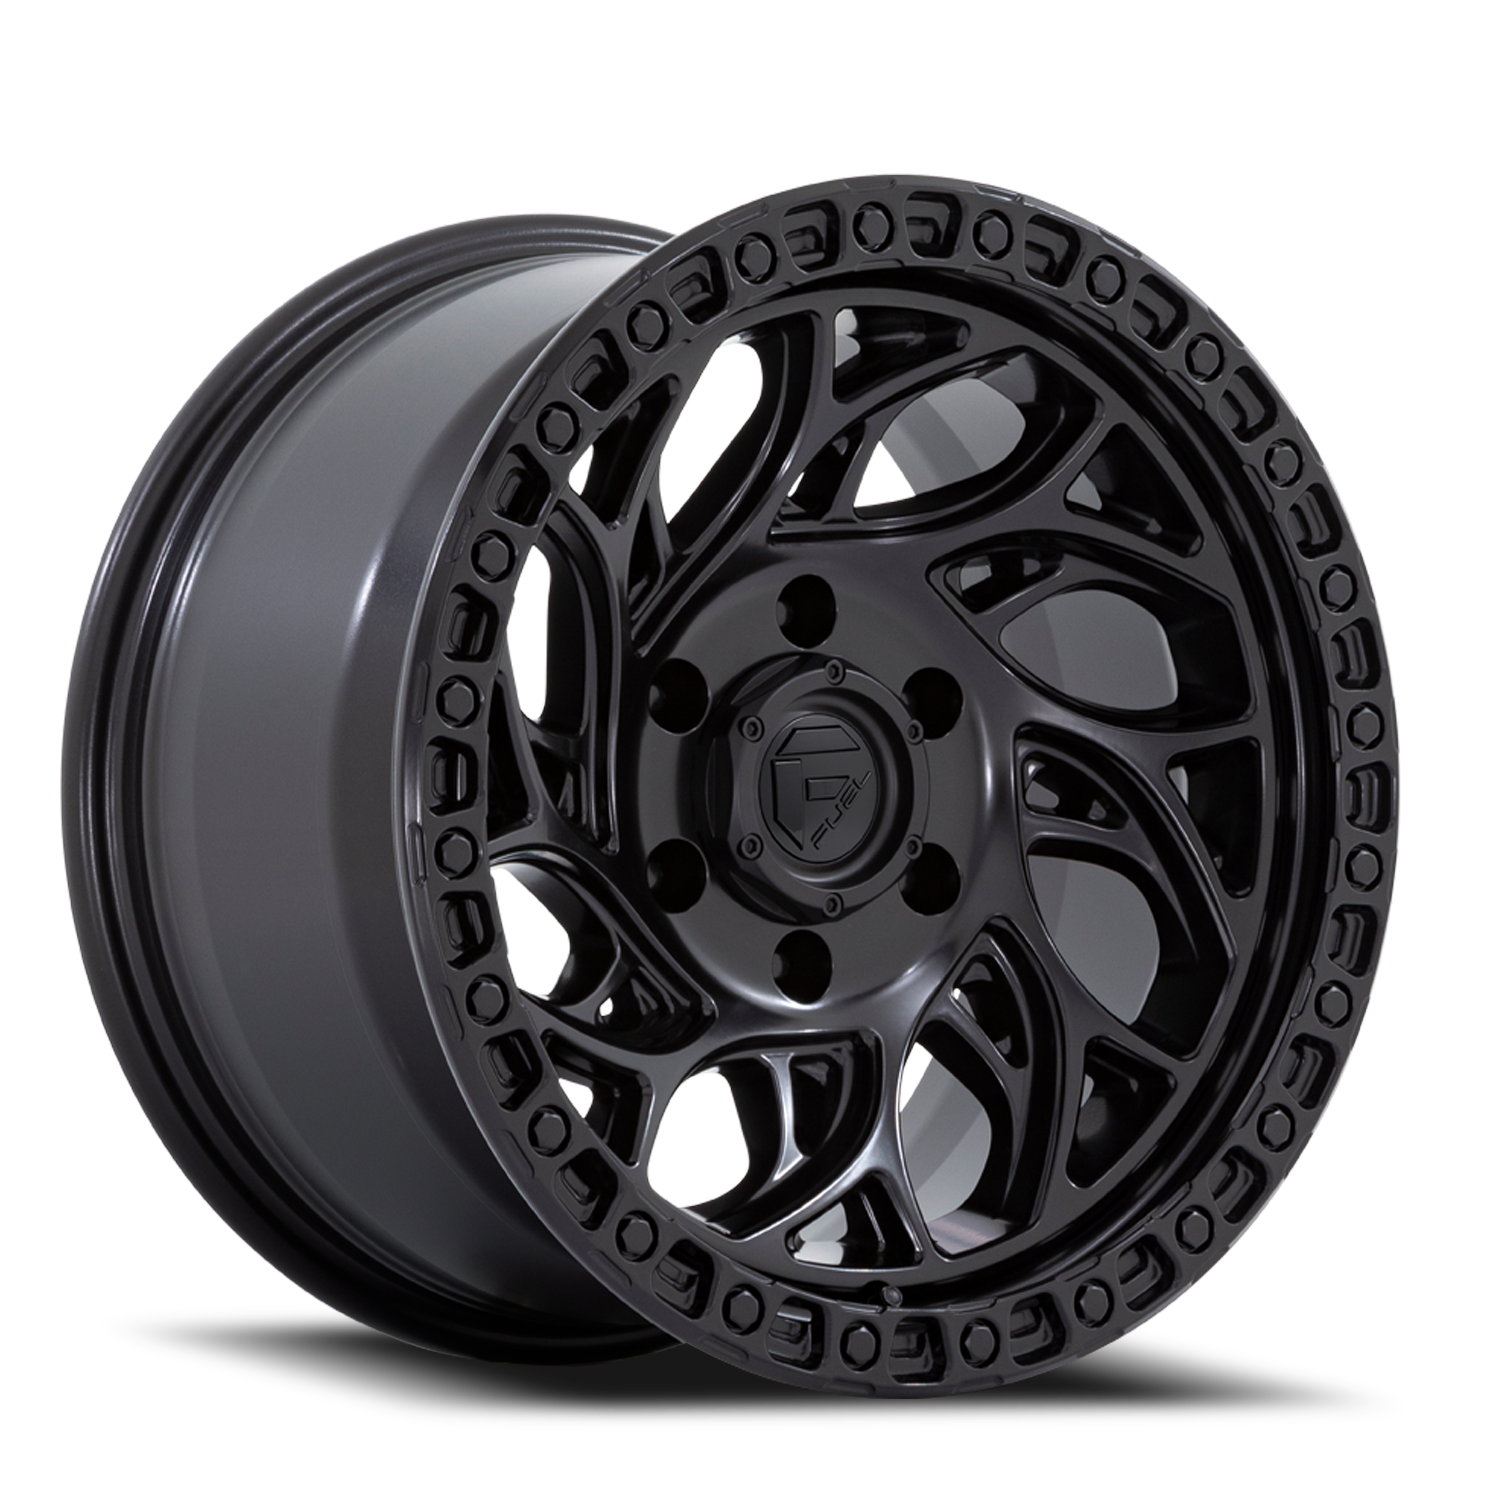 Aluminum Wheels 17X9 Runner OR D852 6 On 120 Blackout 67.06 Bore 1 Offset Fuel Off Road Wheels